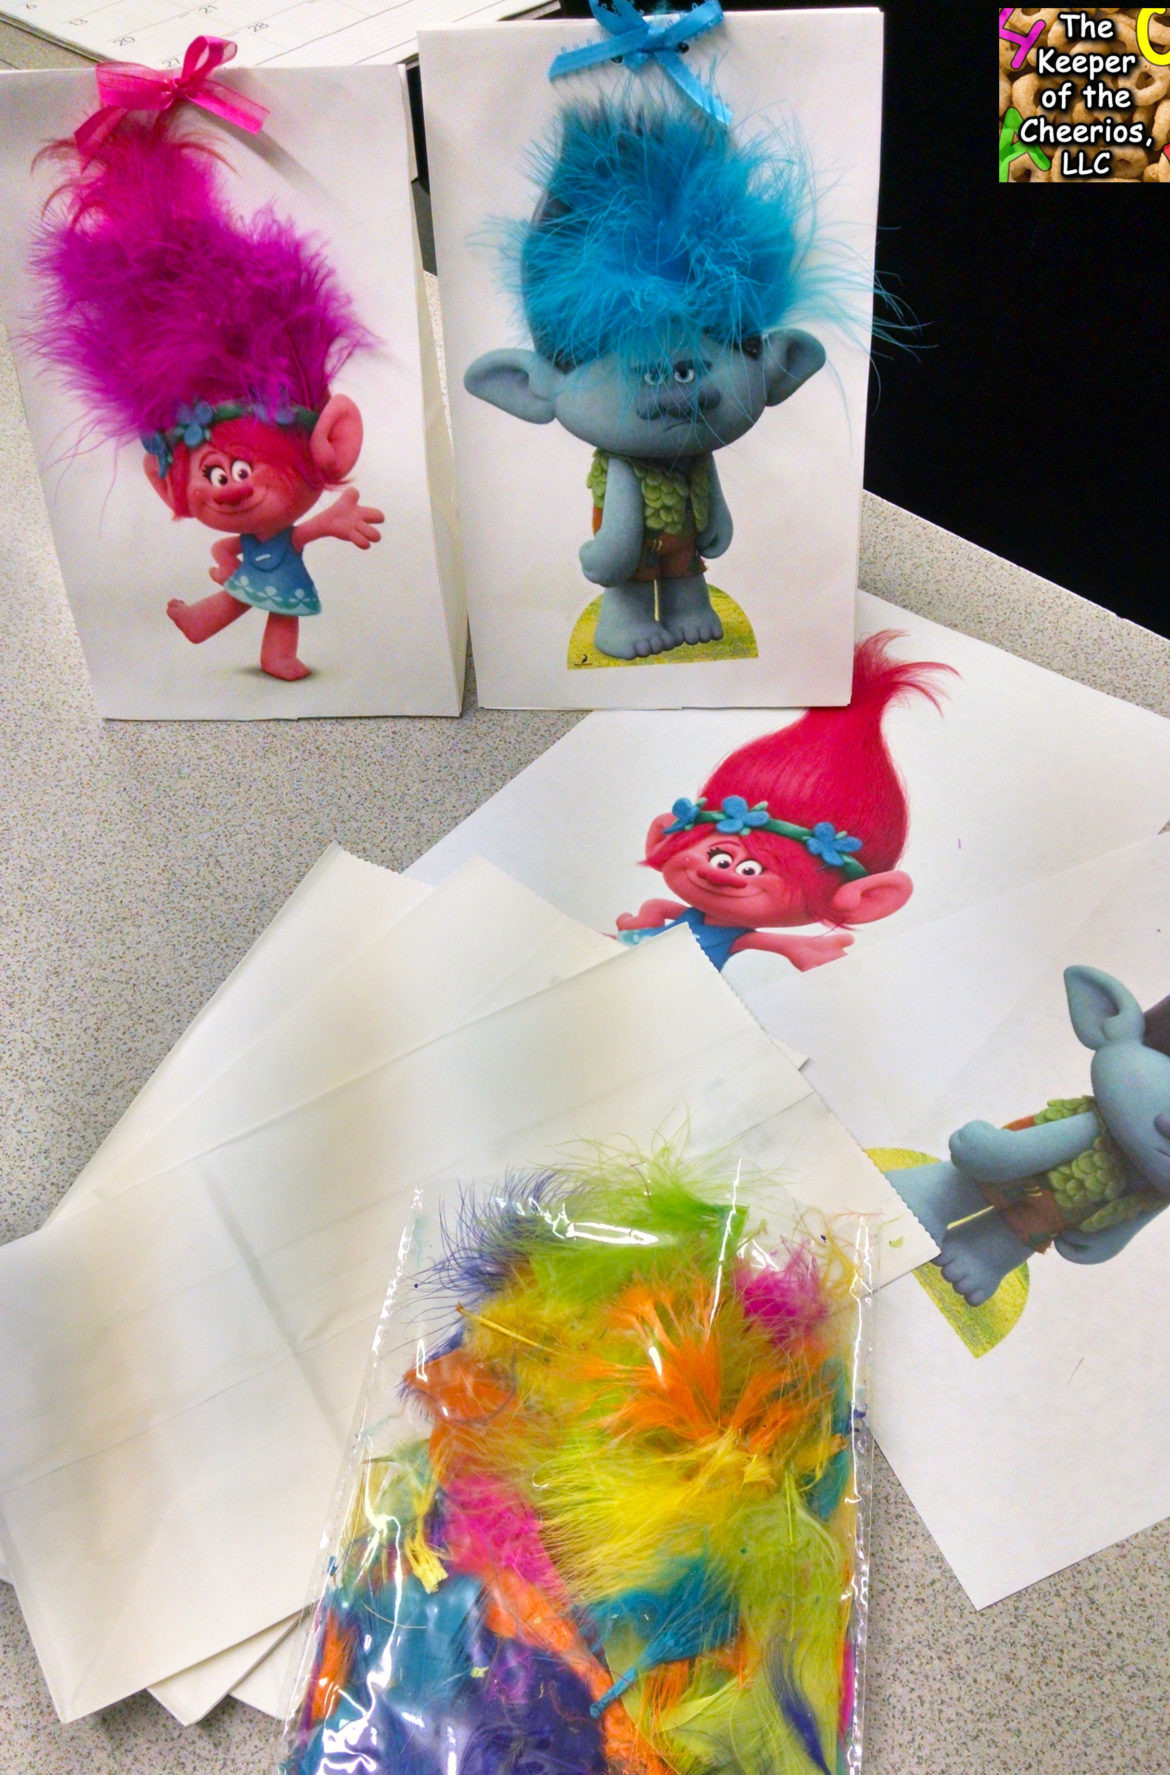 Trolls Movie Party Ideas
 TROLLS PARTY FAVOR BAGS The Keeper of the Cheerios